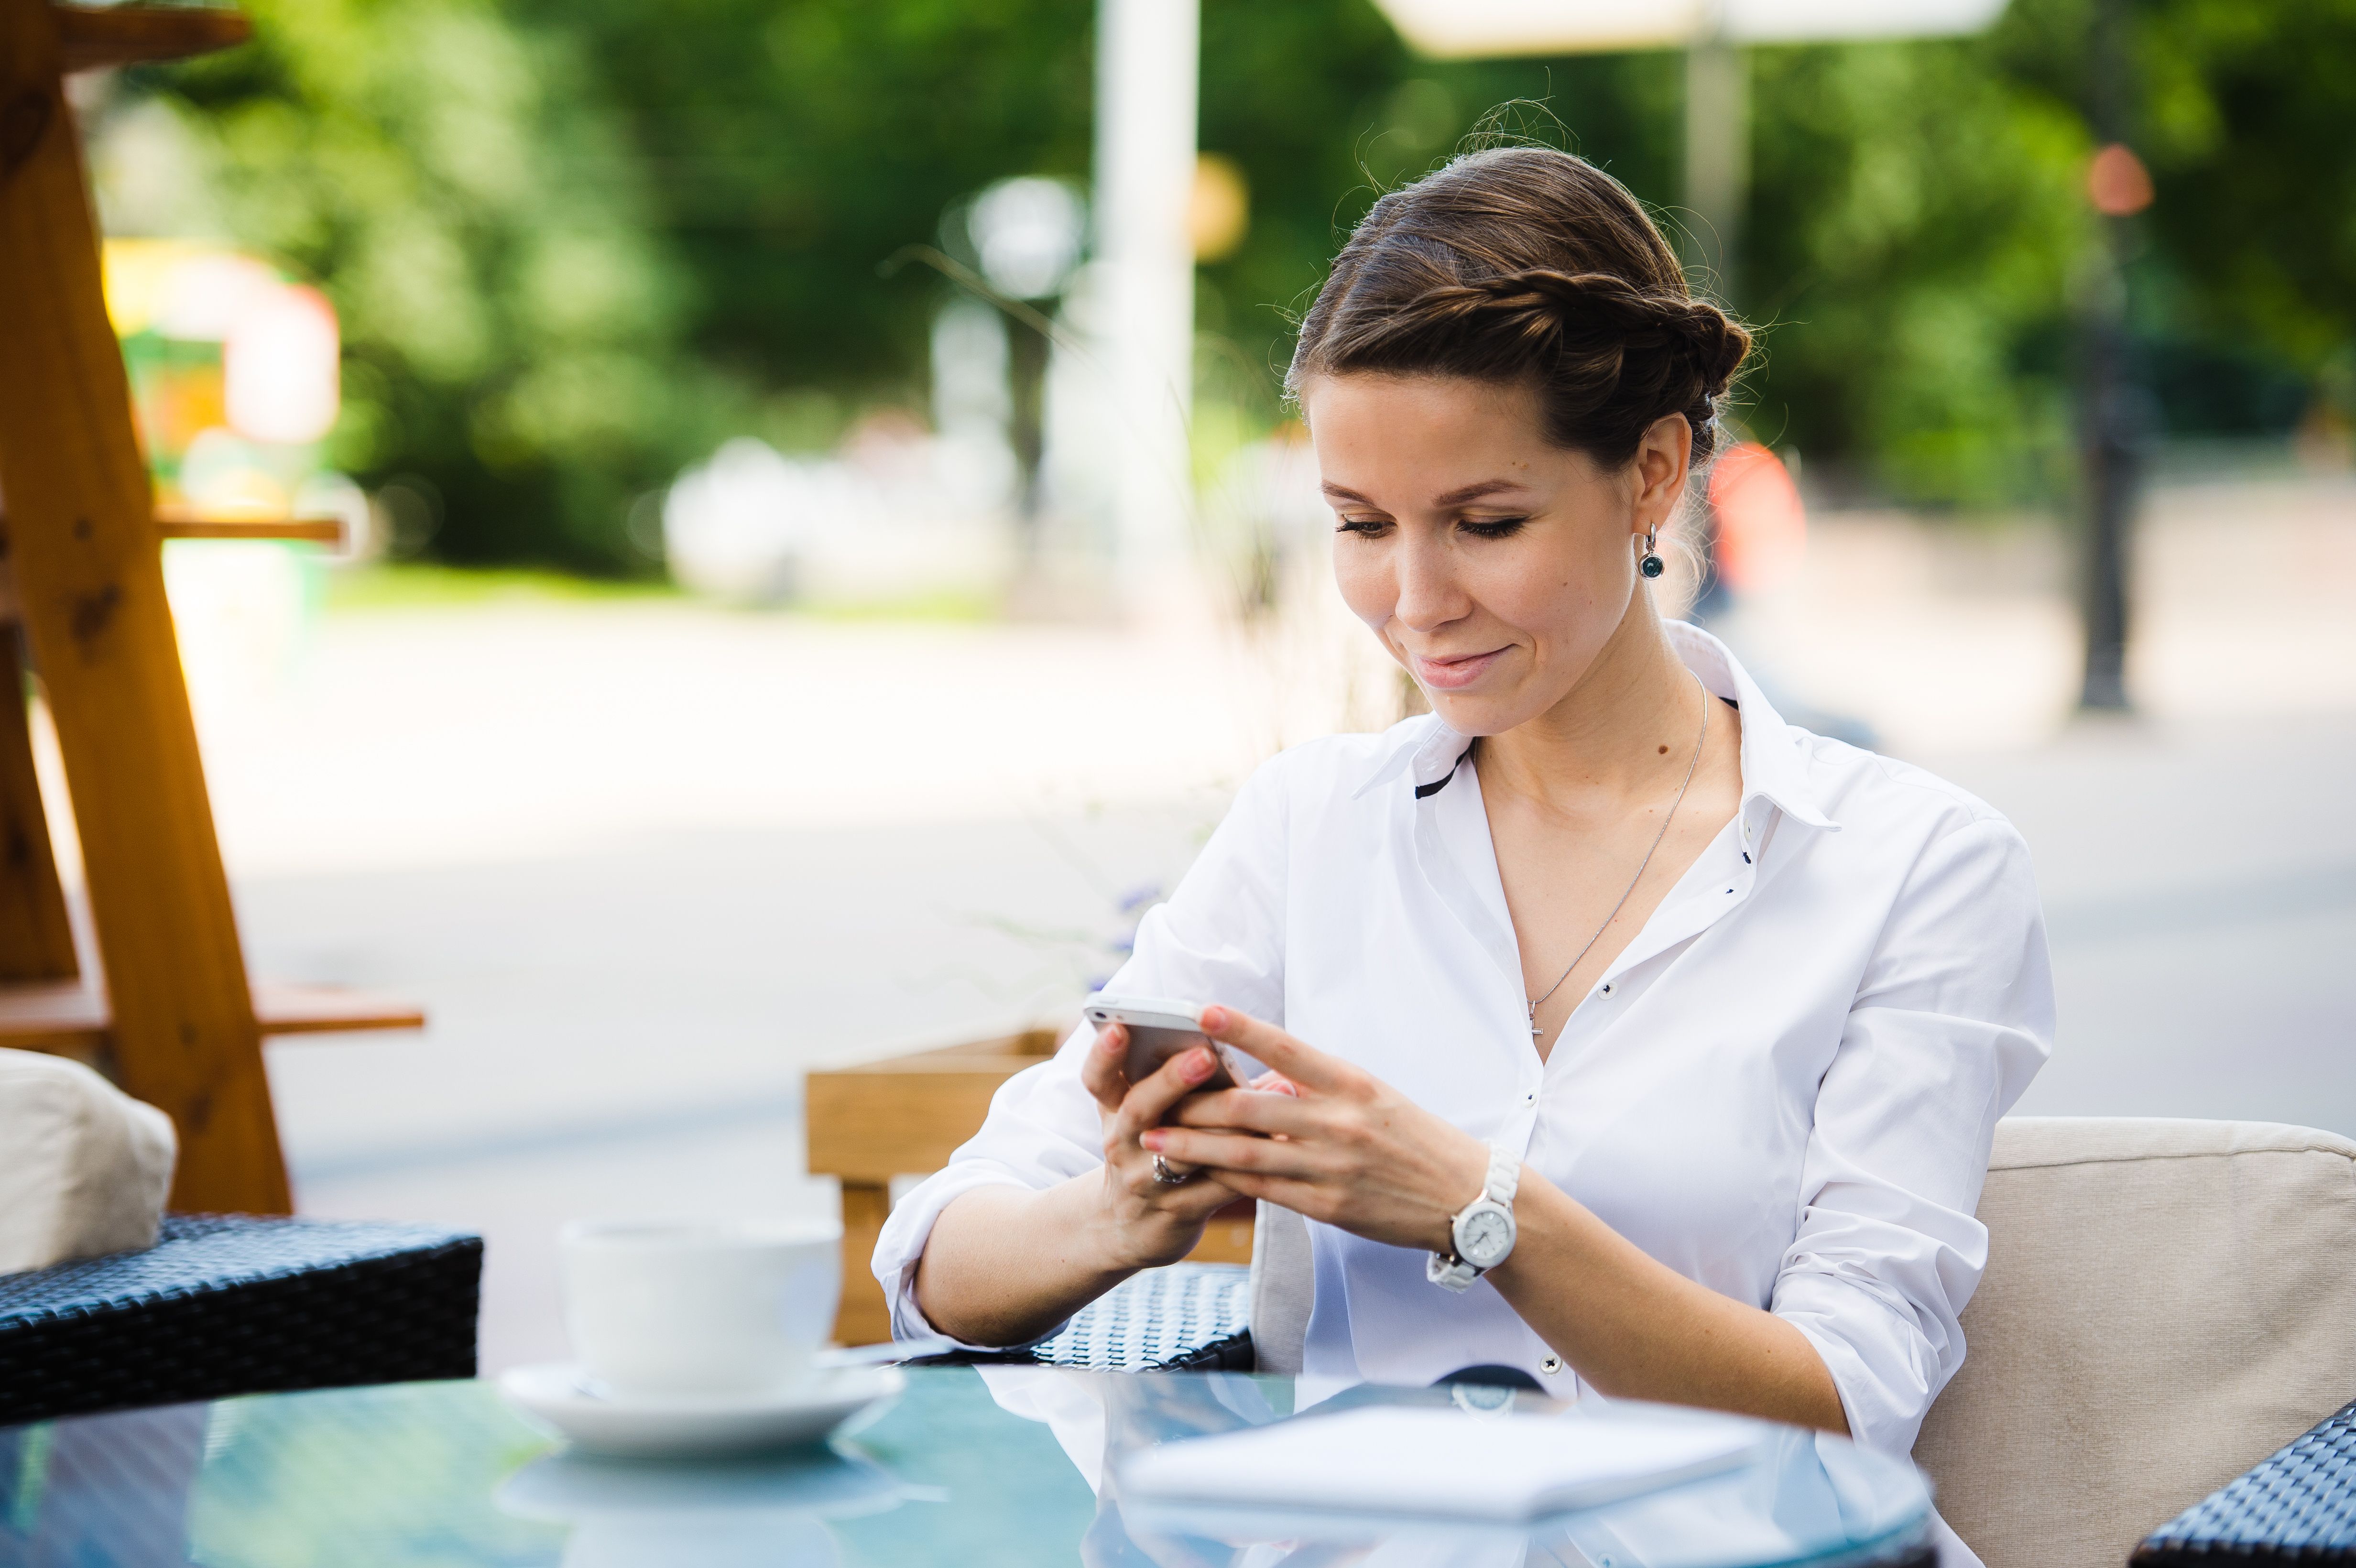 Portrait of a charming business woman chatting on her smart phone while waiting someone in cafe outdoors,